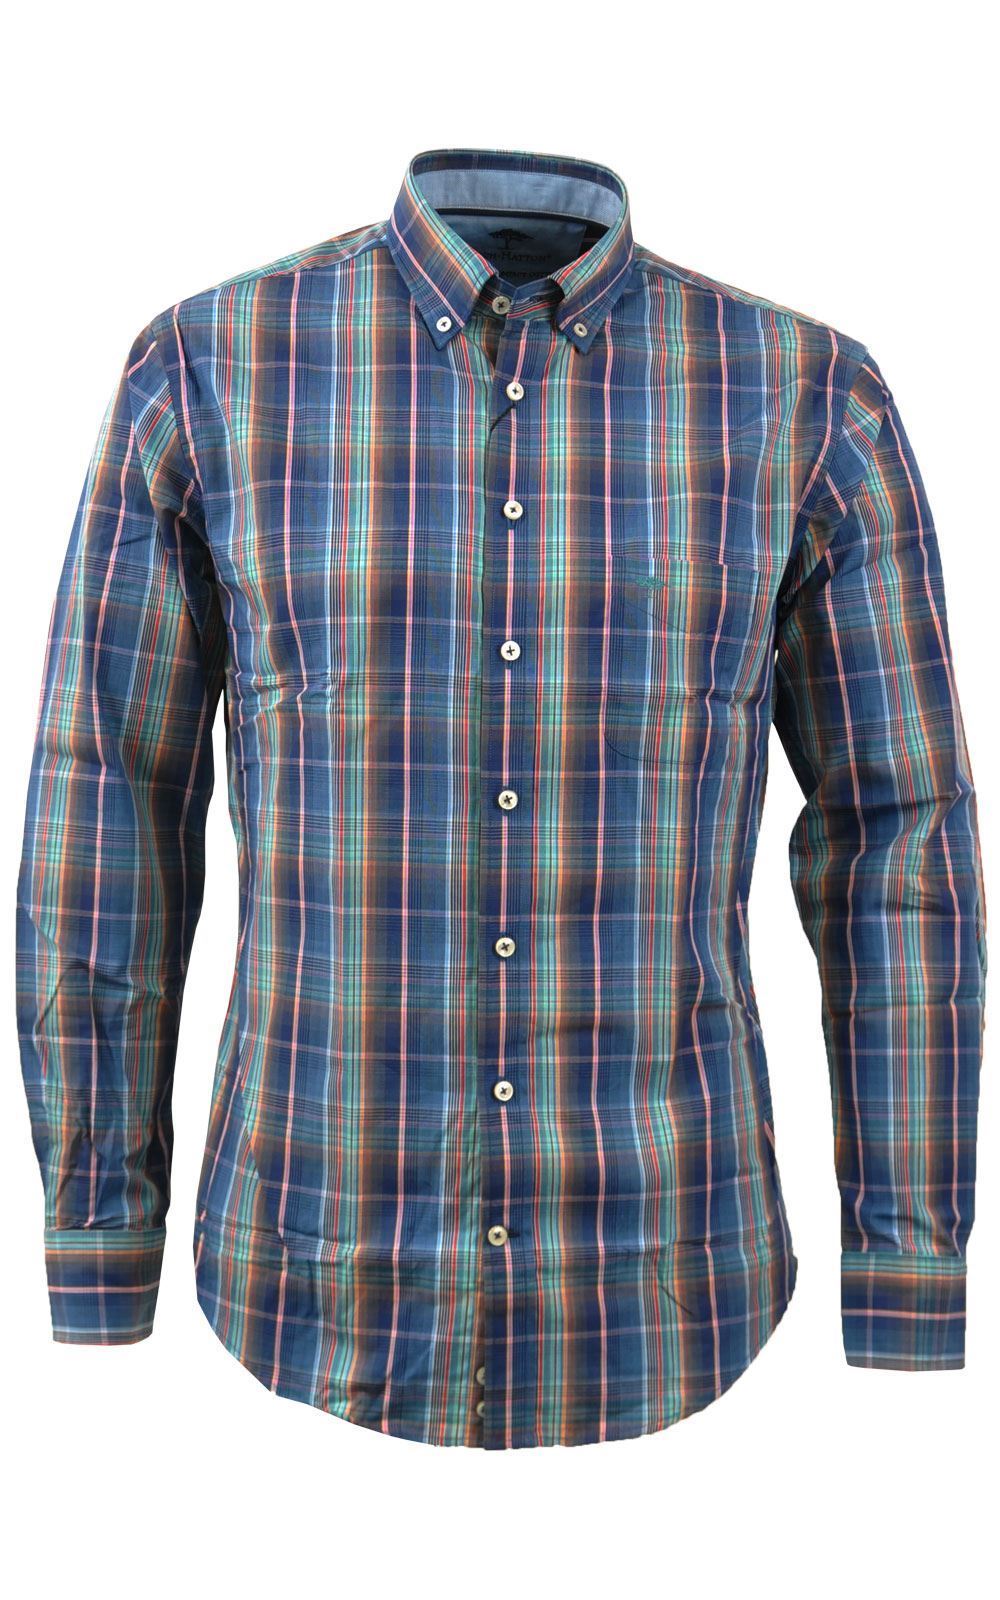 Picture of Fynch-Hatton Long Sleeve Shirt 1119-6100